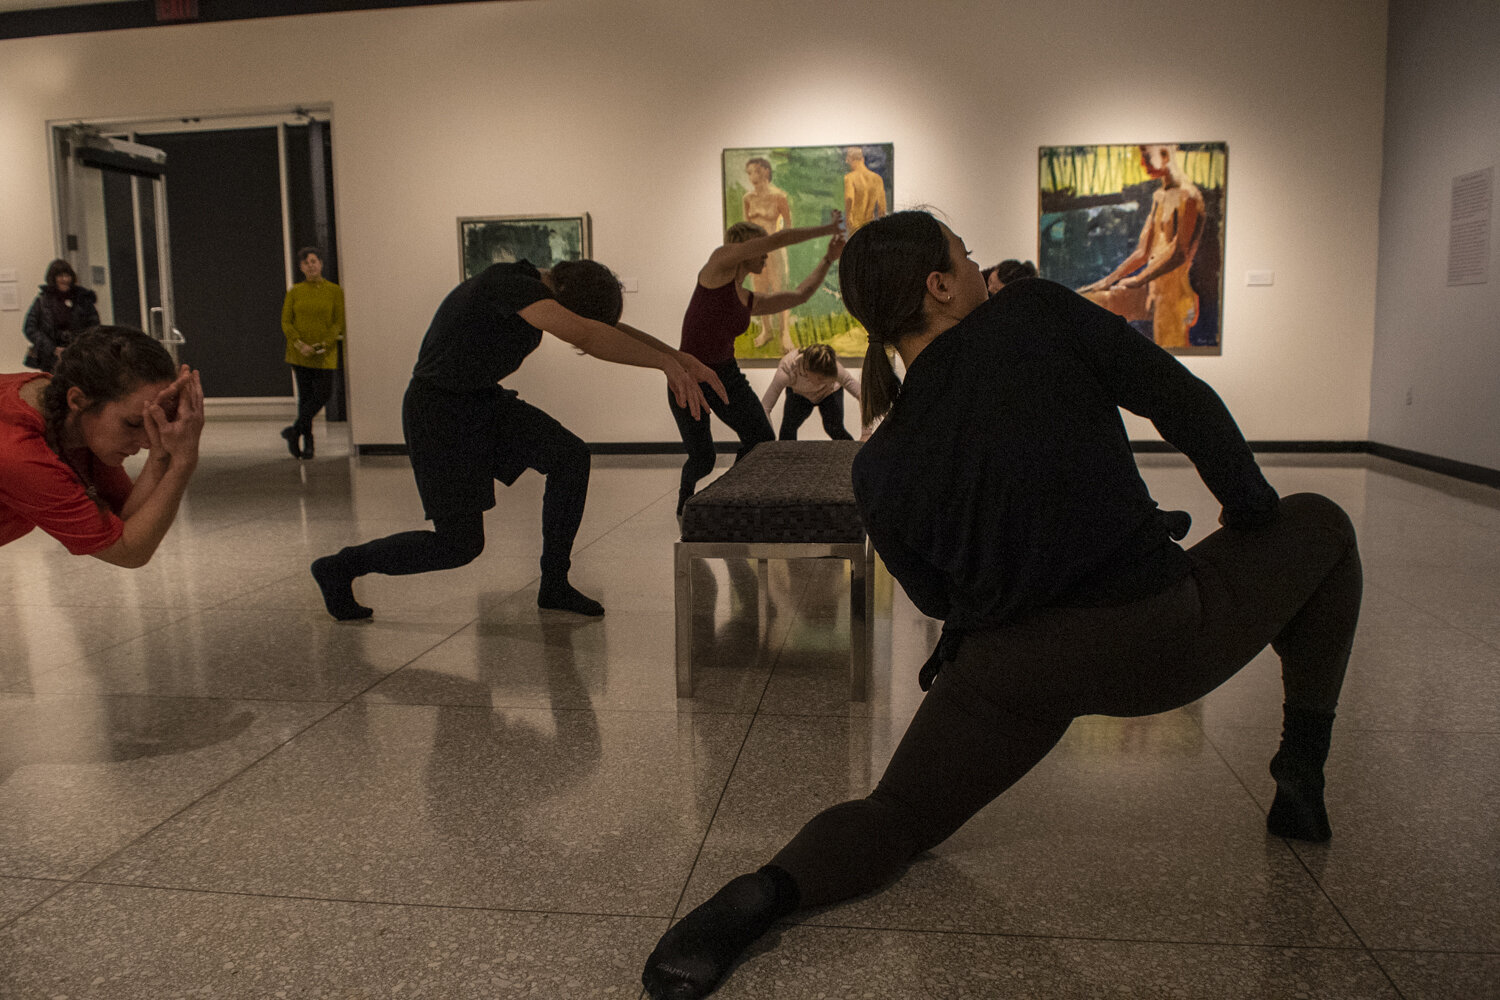 Company Dancers in Art Gallery Performing